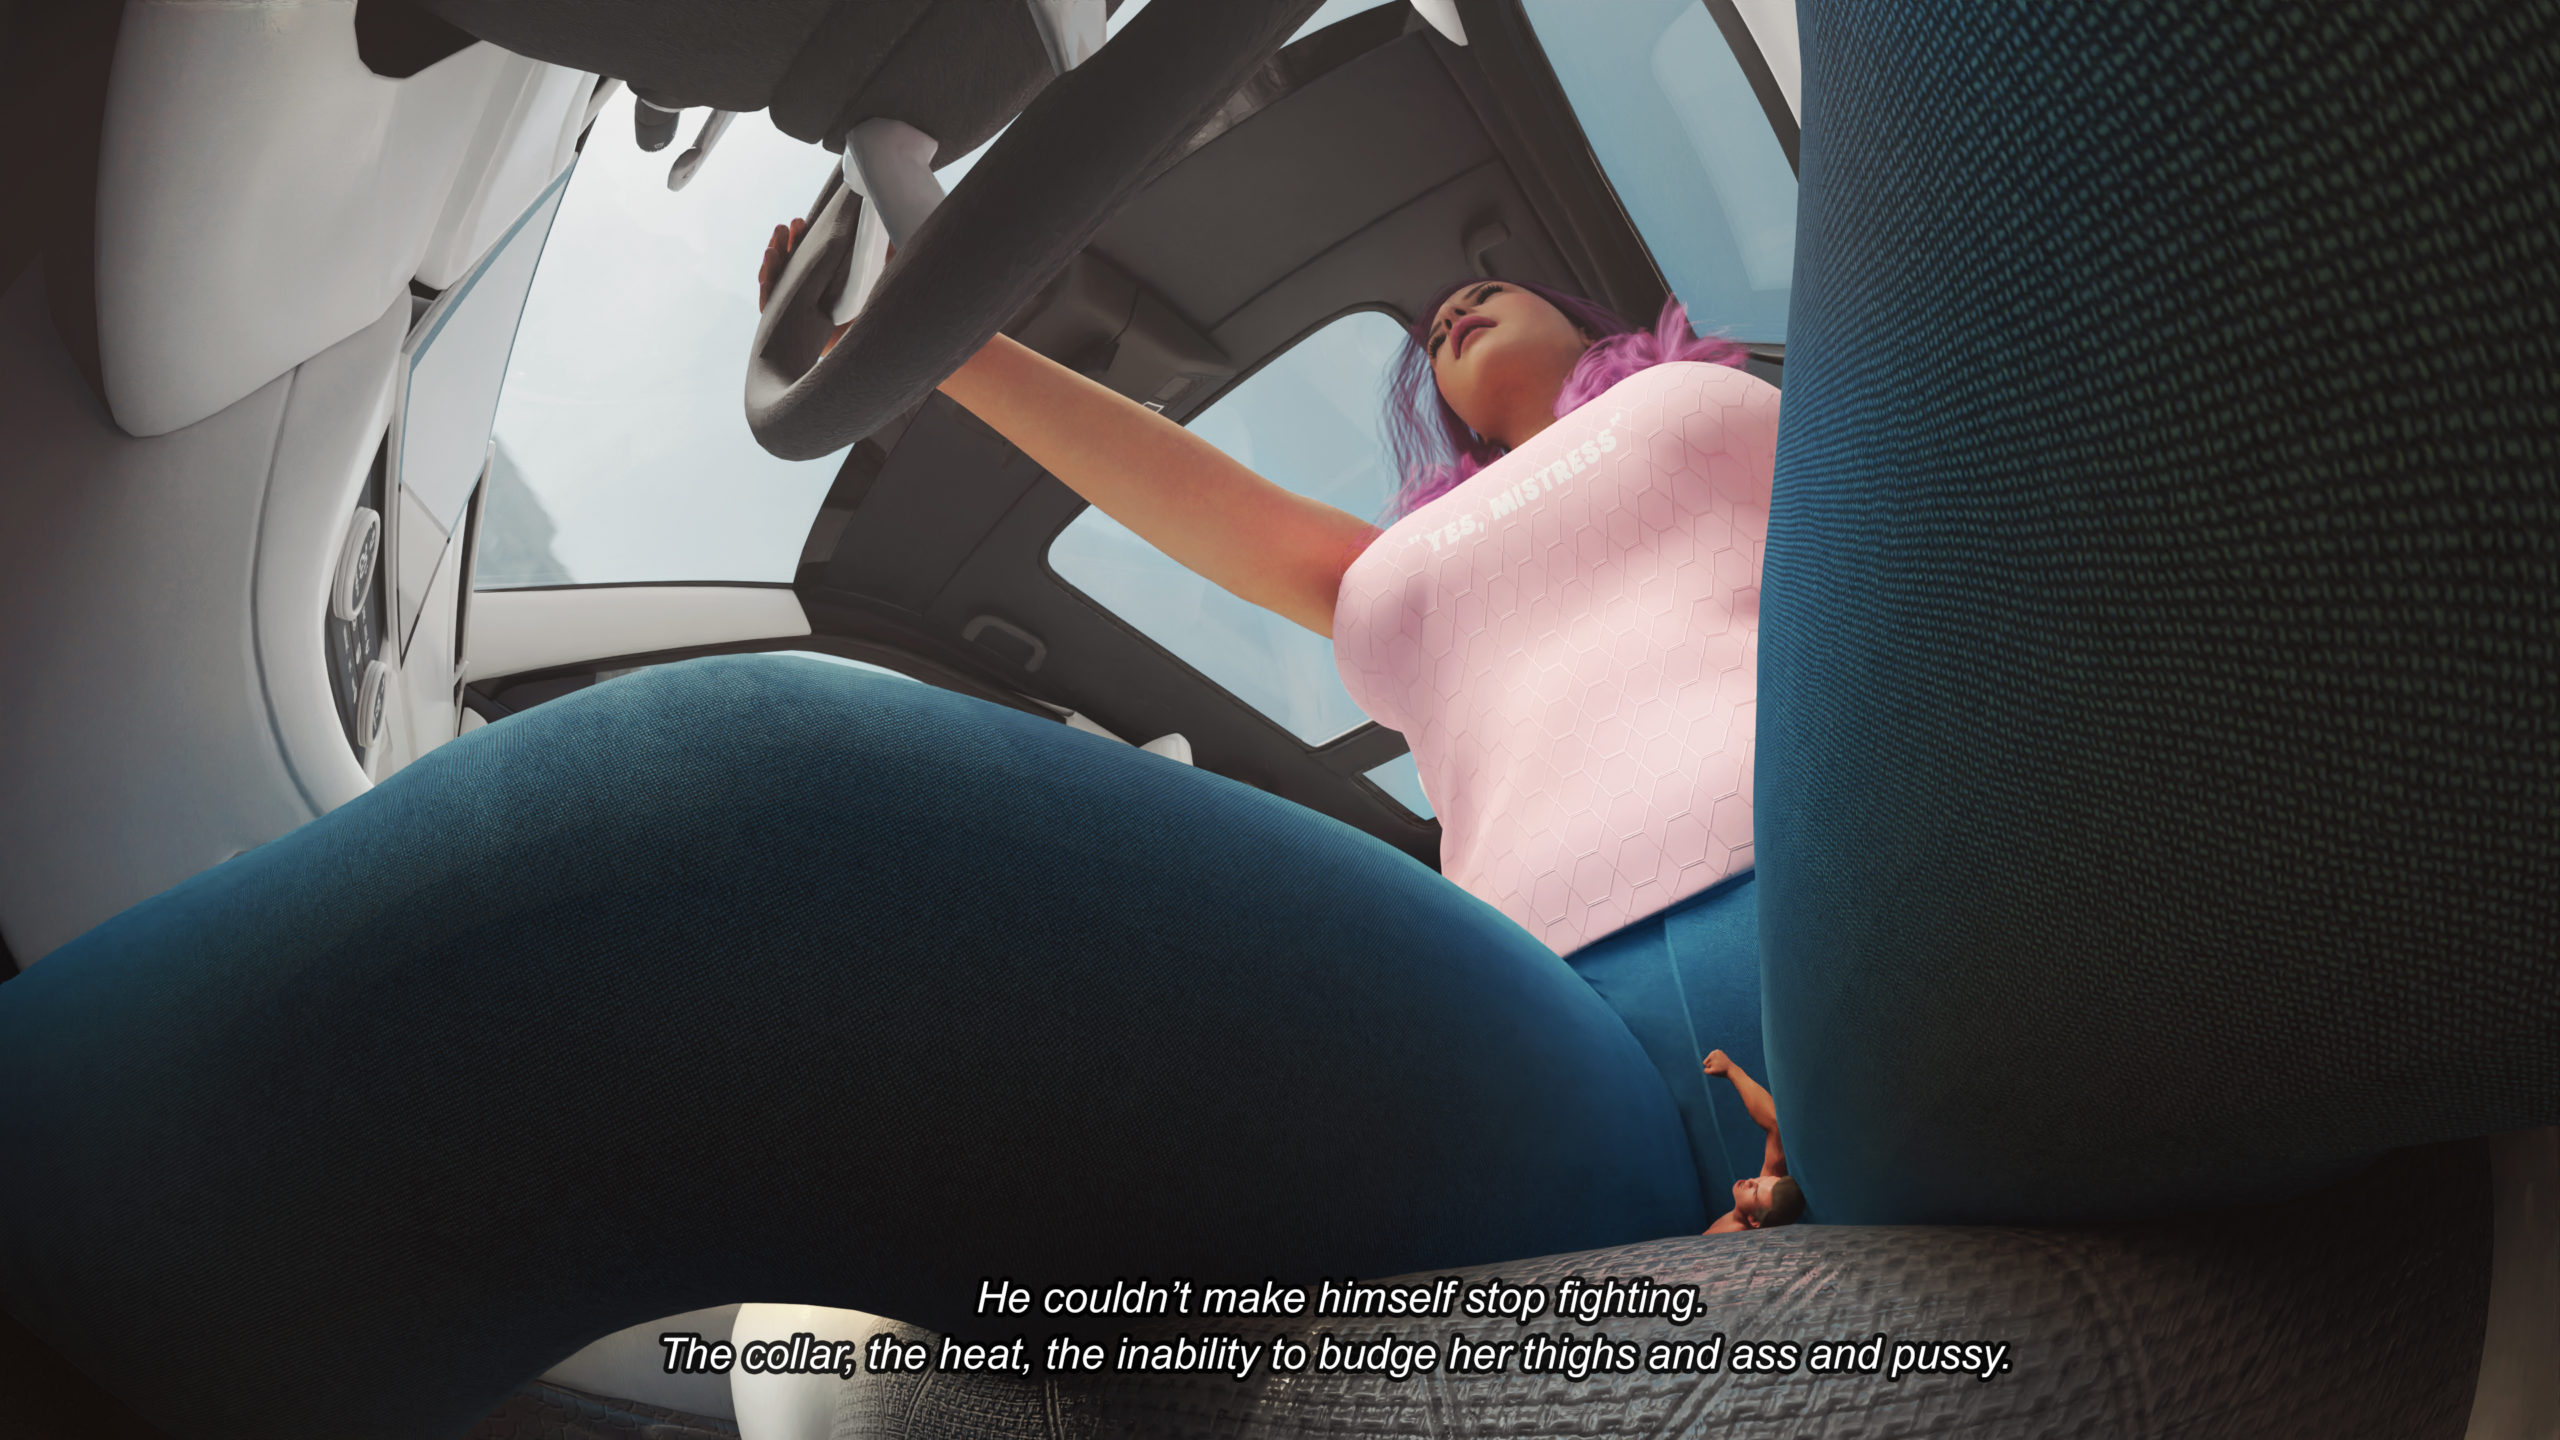 Digital render art of a tiny man trapped beneath a woman who's driving a car. He's nude and underneath her vulva, with her blue leggings stretching out in all directions. The image is an extreme angle view to show the strange perspective of the woman's legs, breasts, and body, and the car itself, while trapped and tiny. Text reads "He couldn't make himself stop fighting. The collar, the heat, the inability to budge her thighs and ass and pussy." Created by Giantess Tina.